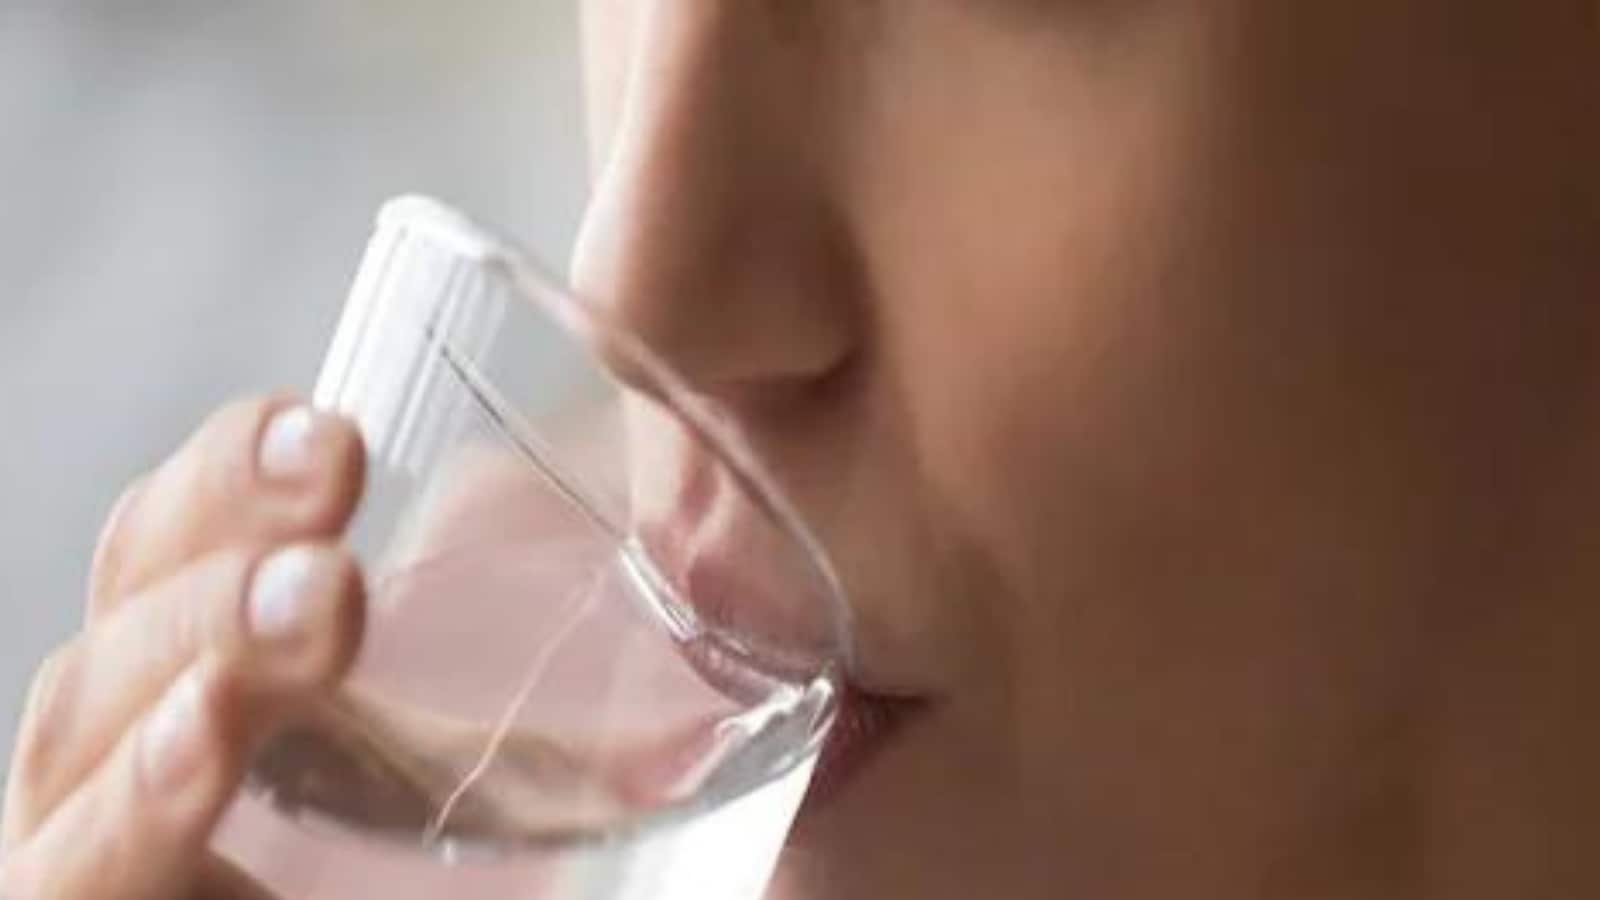 Drinking Water Before Going to Bed Benefits Your Body in These 6 Ways